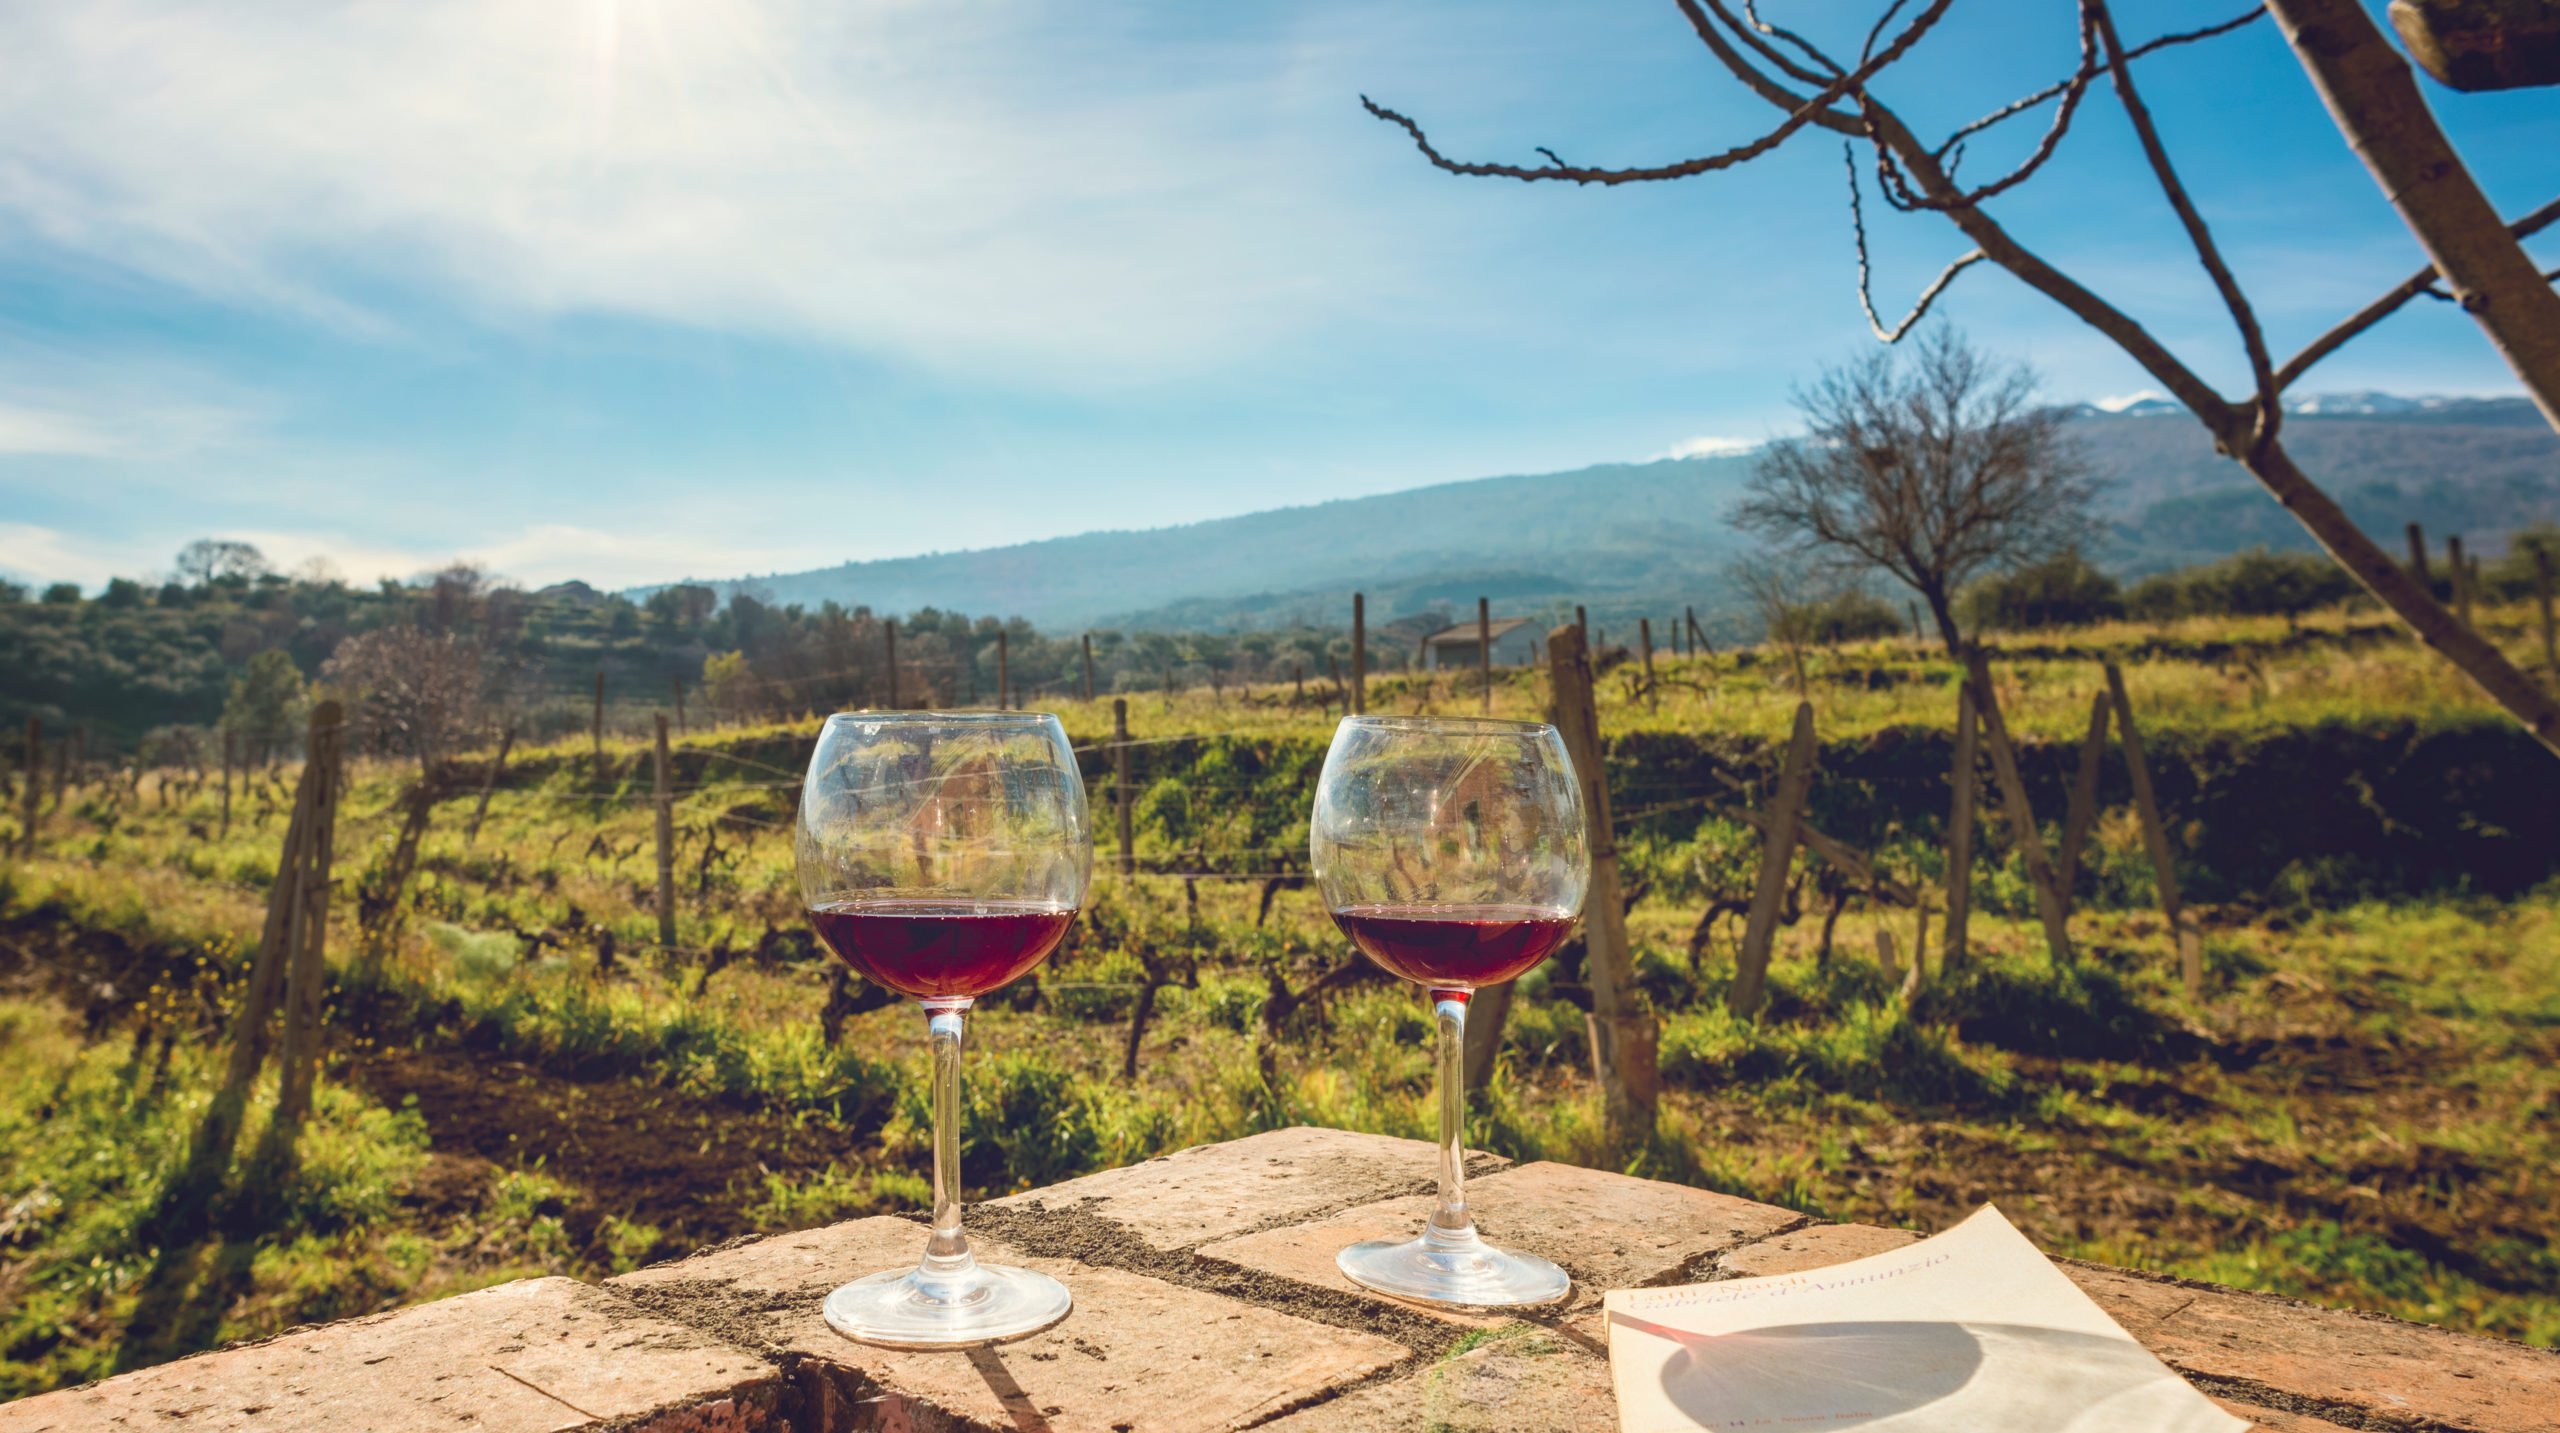 Try The Delicious Local Wines Overlooking Mt Etna On The Etna Food And Wine Tour From Taormina